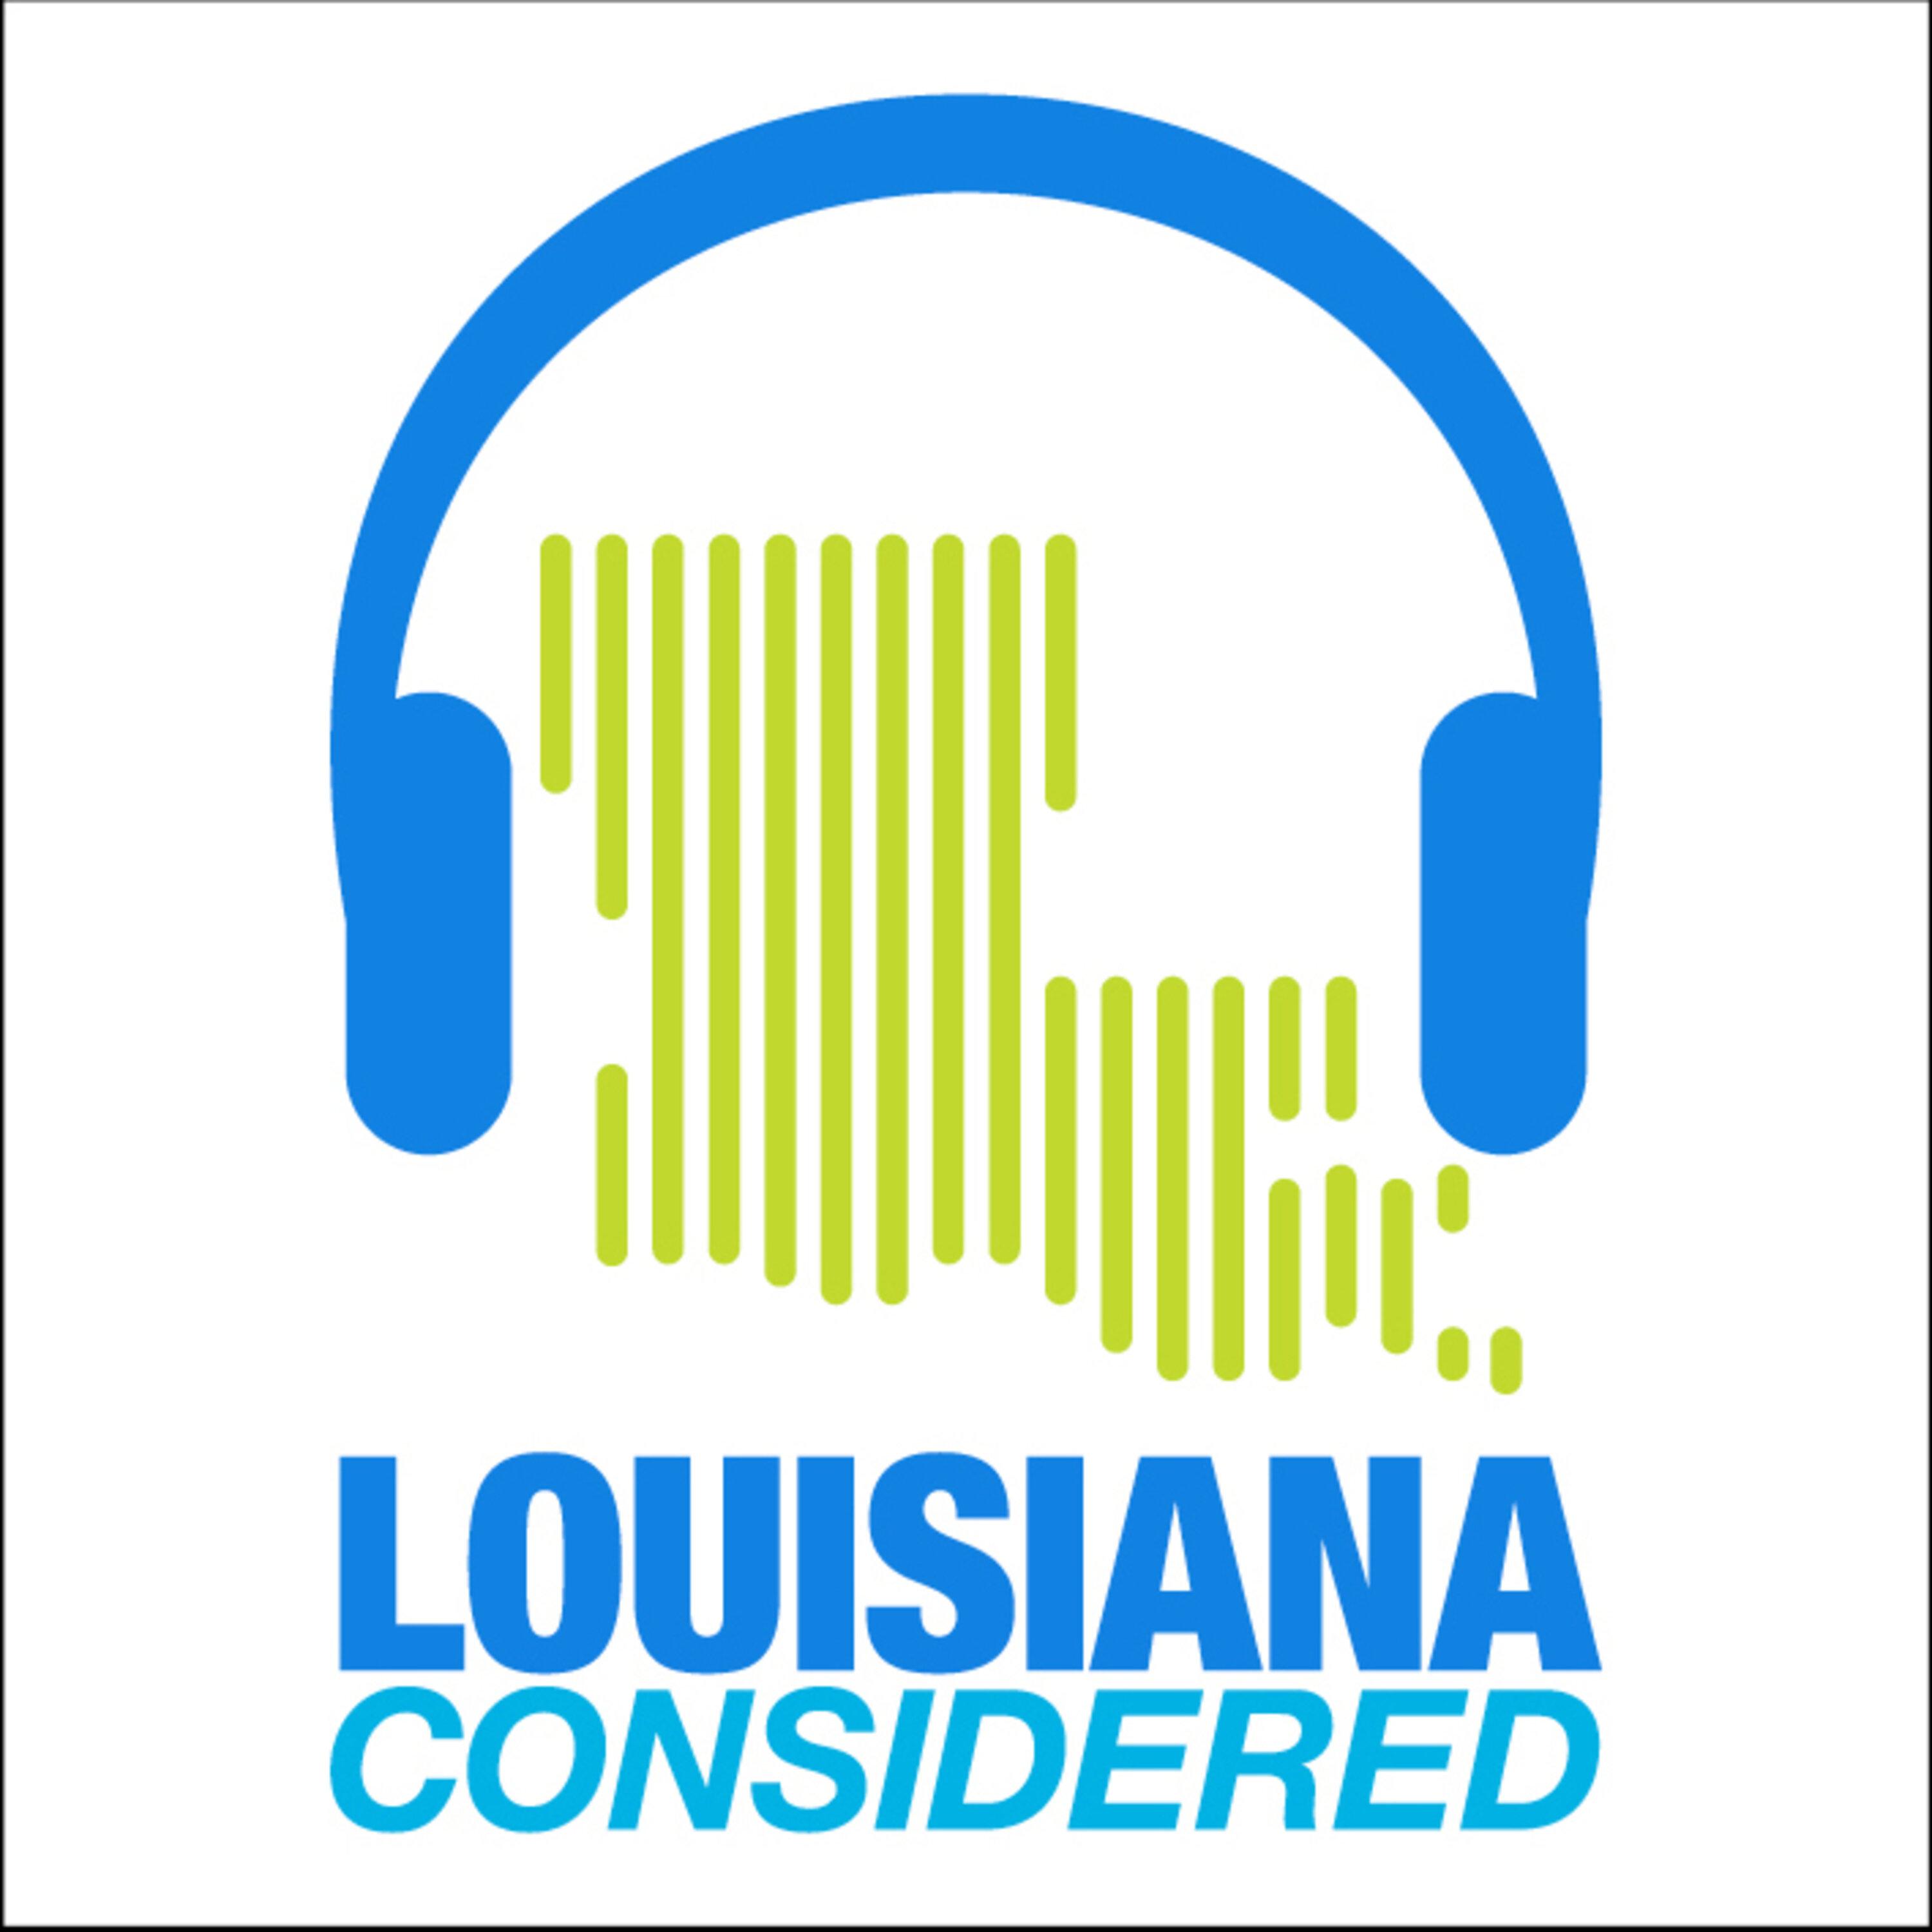 Thumbnail for "Louisiana Considered: COVID-19 Hospitalizations And Case Numbers Set New Records, Hammond Hospital CEO Describes Surge’s Effects On Her Staff, How The State Is Handling The Fourth Surge".